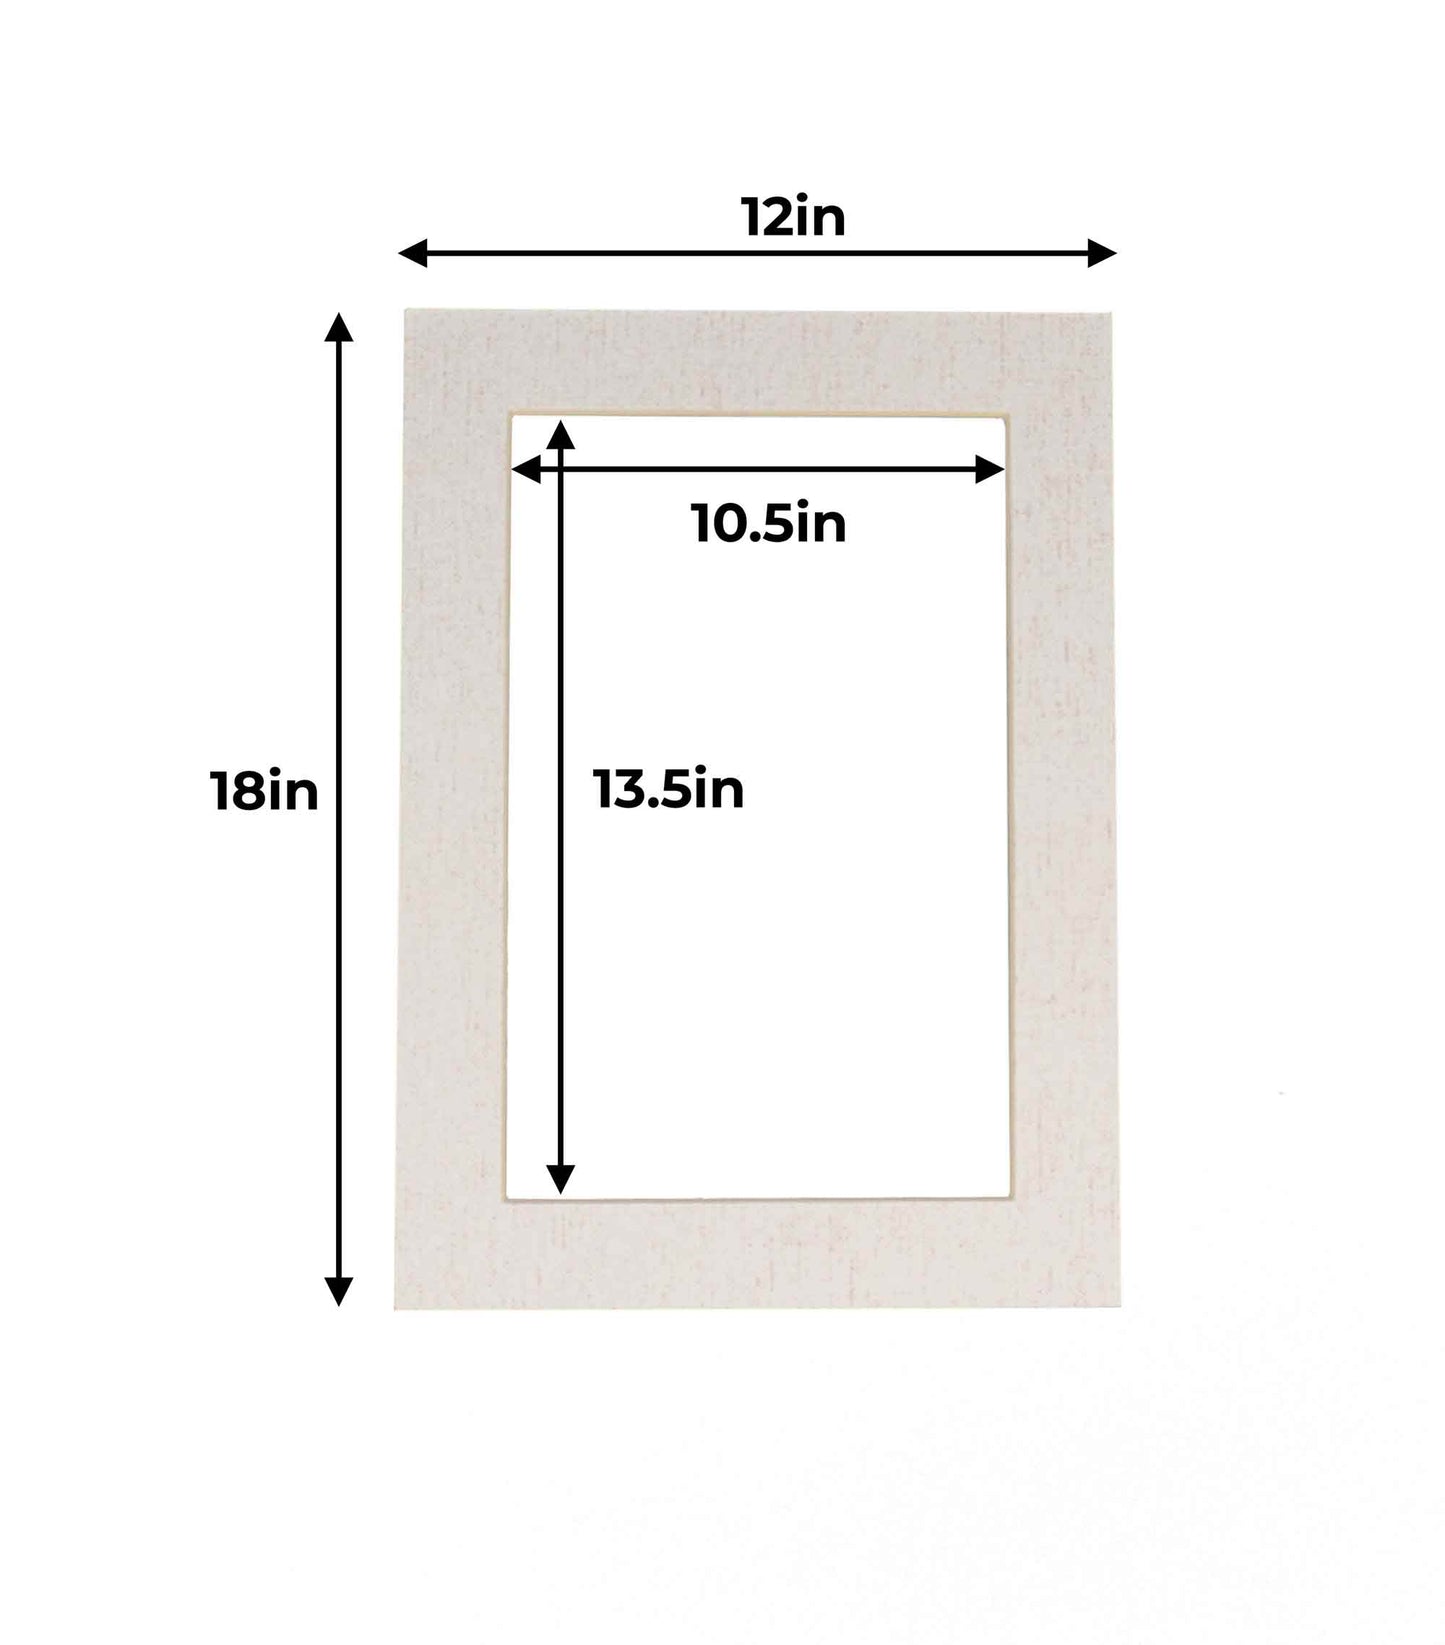 Pack of 10 White Linen Canvas Precut Acid-Free Matboards